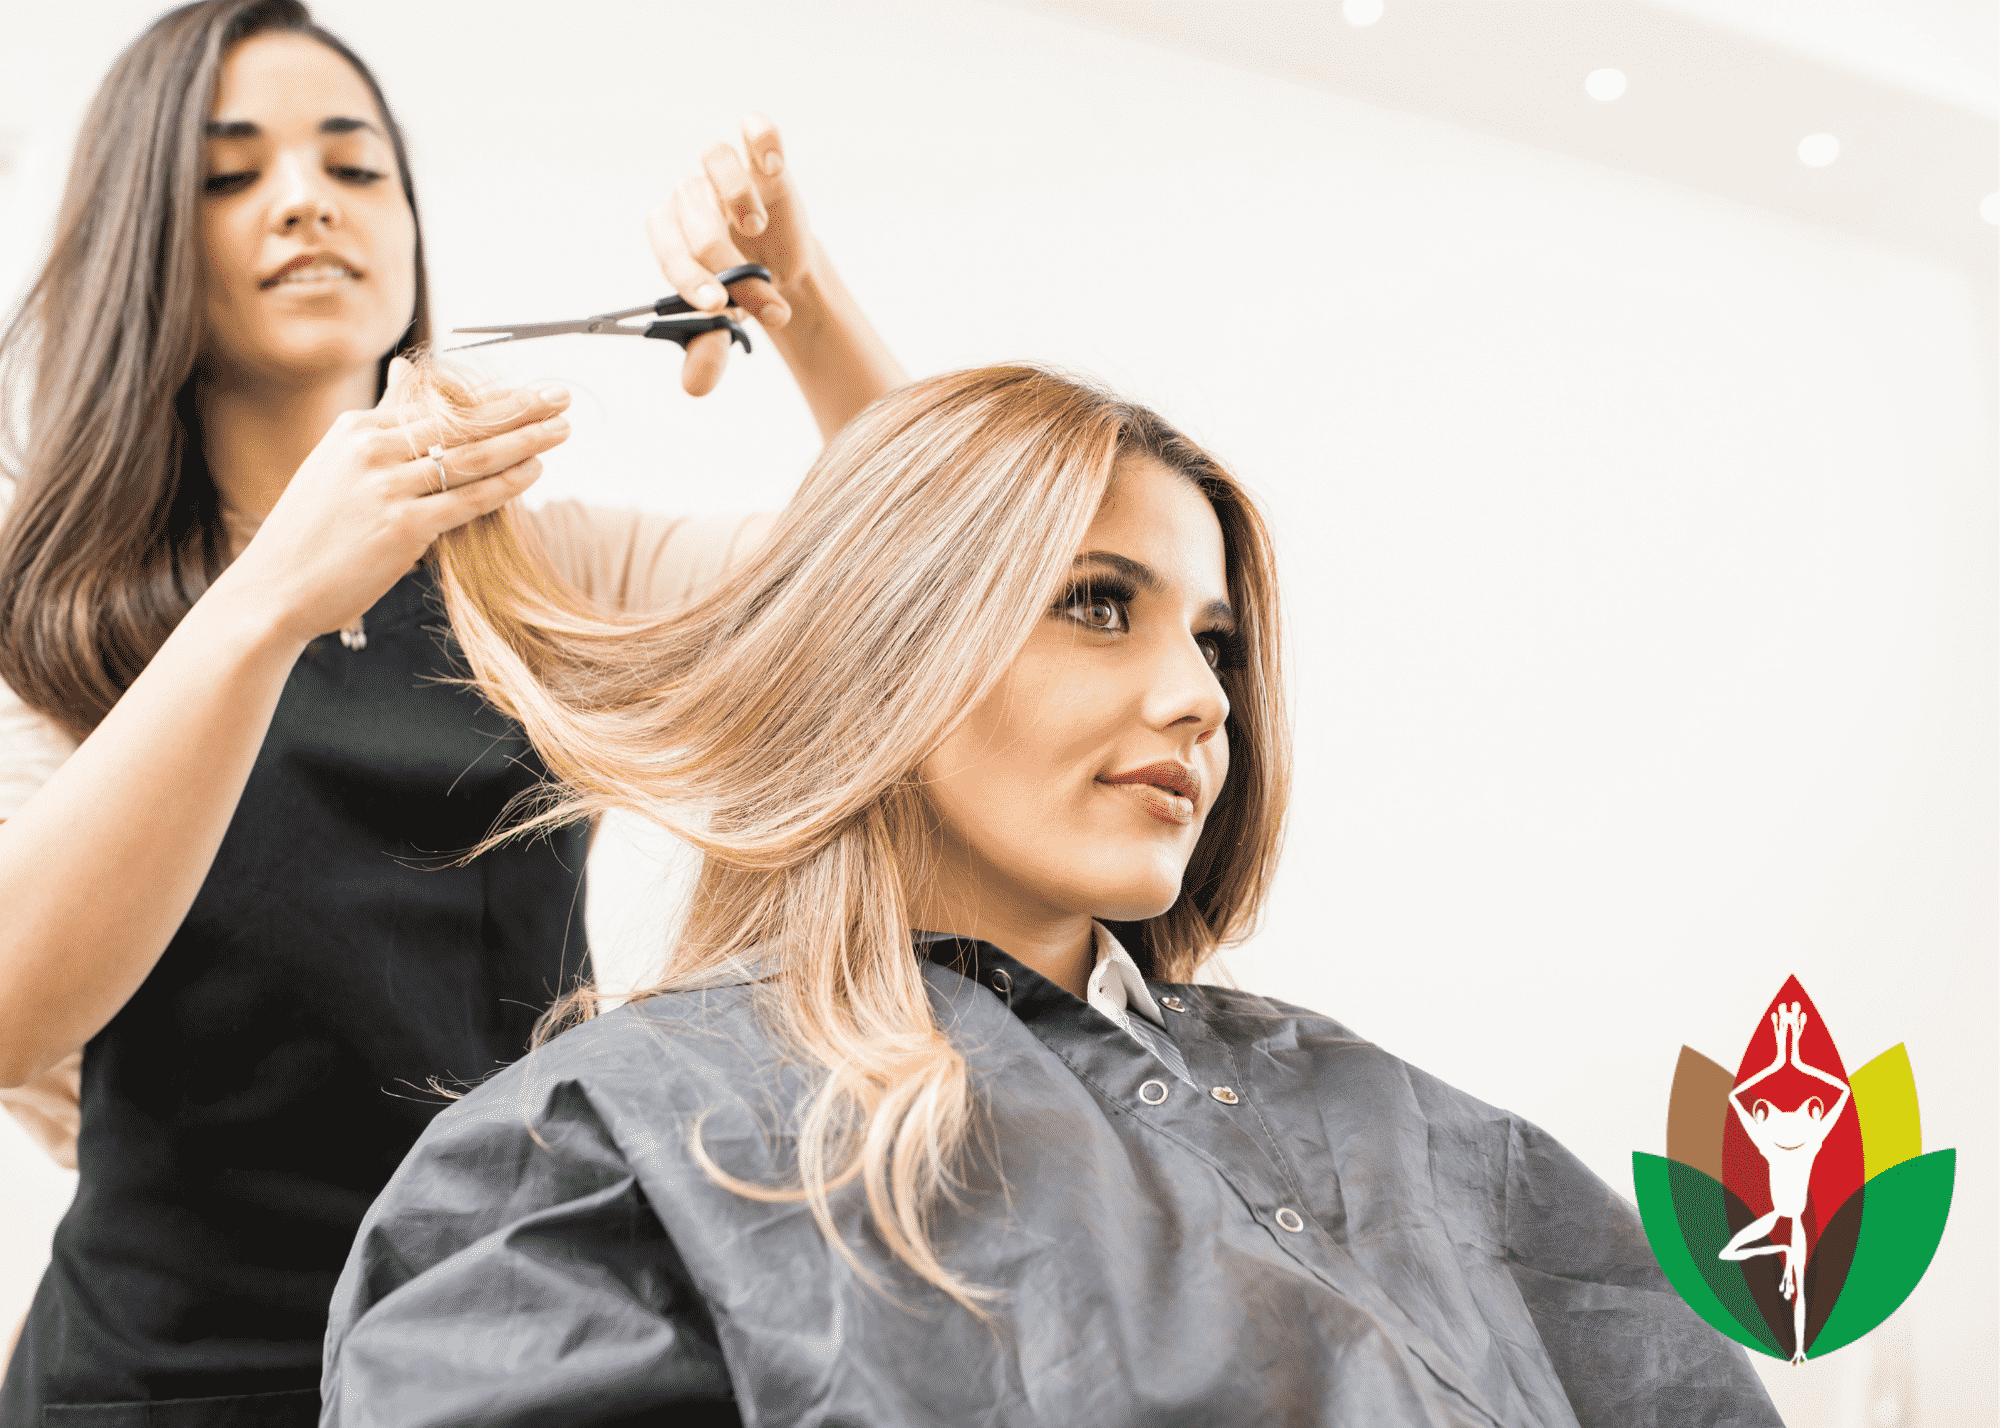 Easy Fix for Hairstylist Pain | WholeFrog